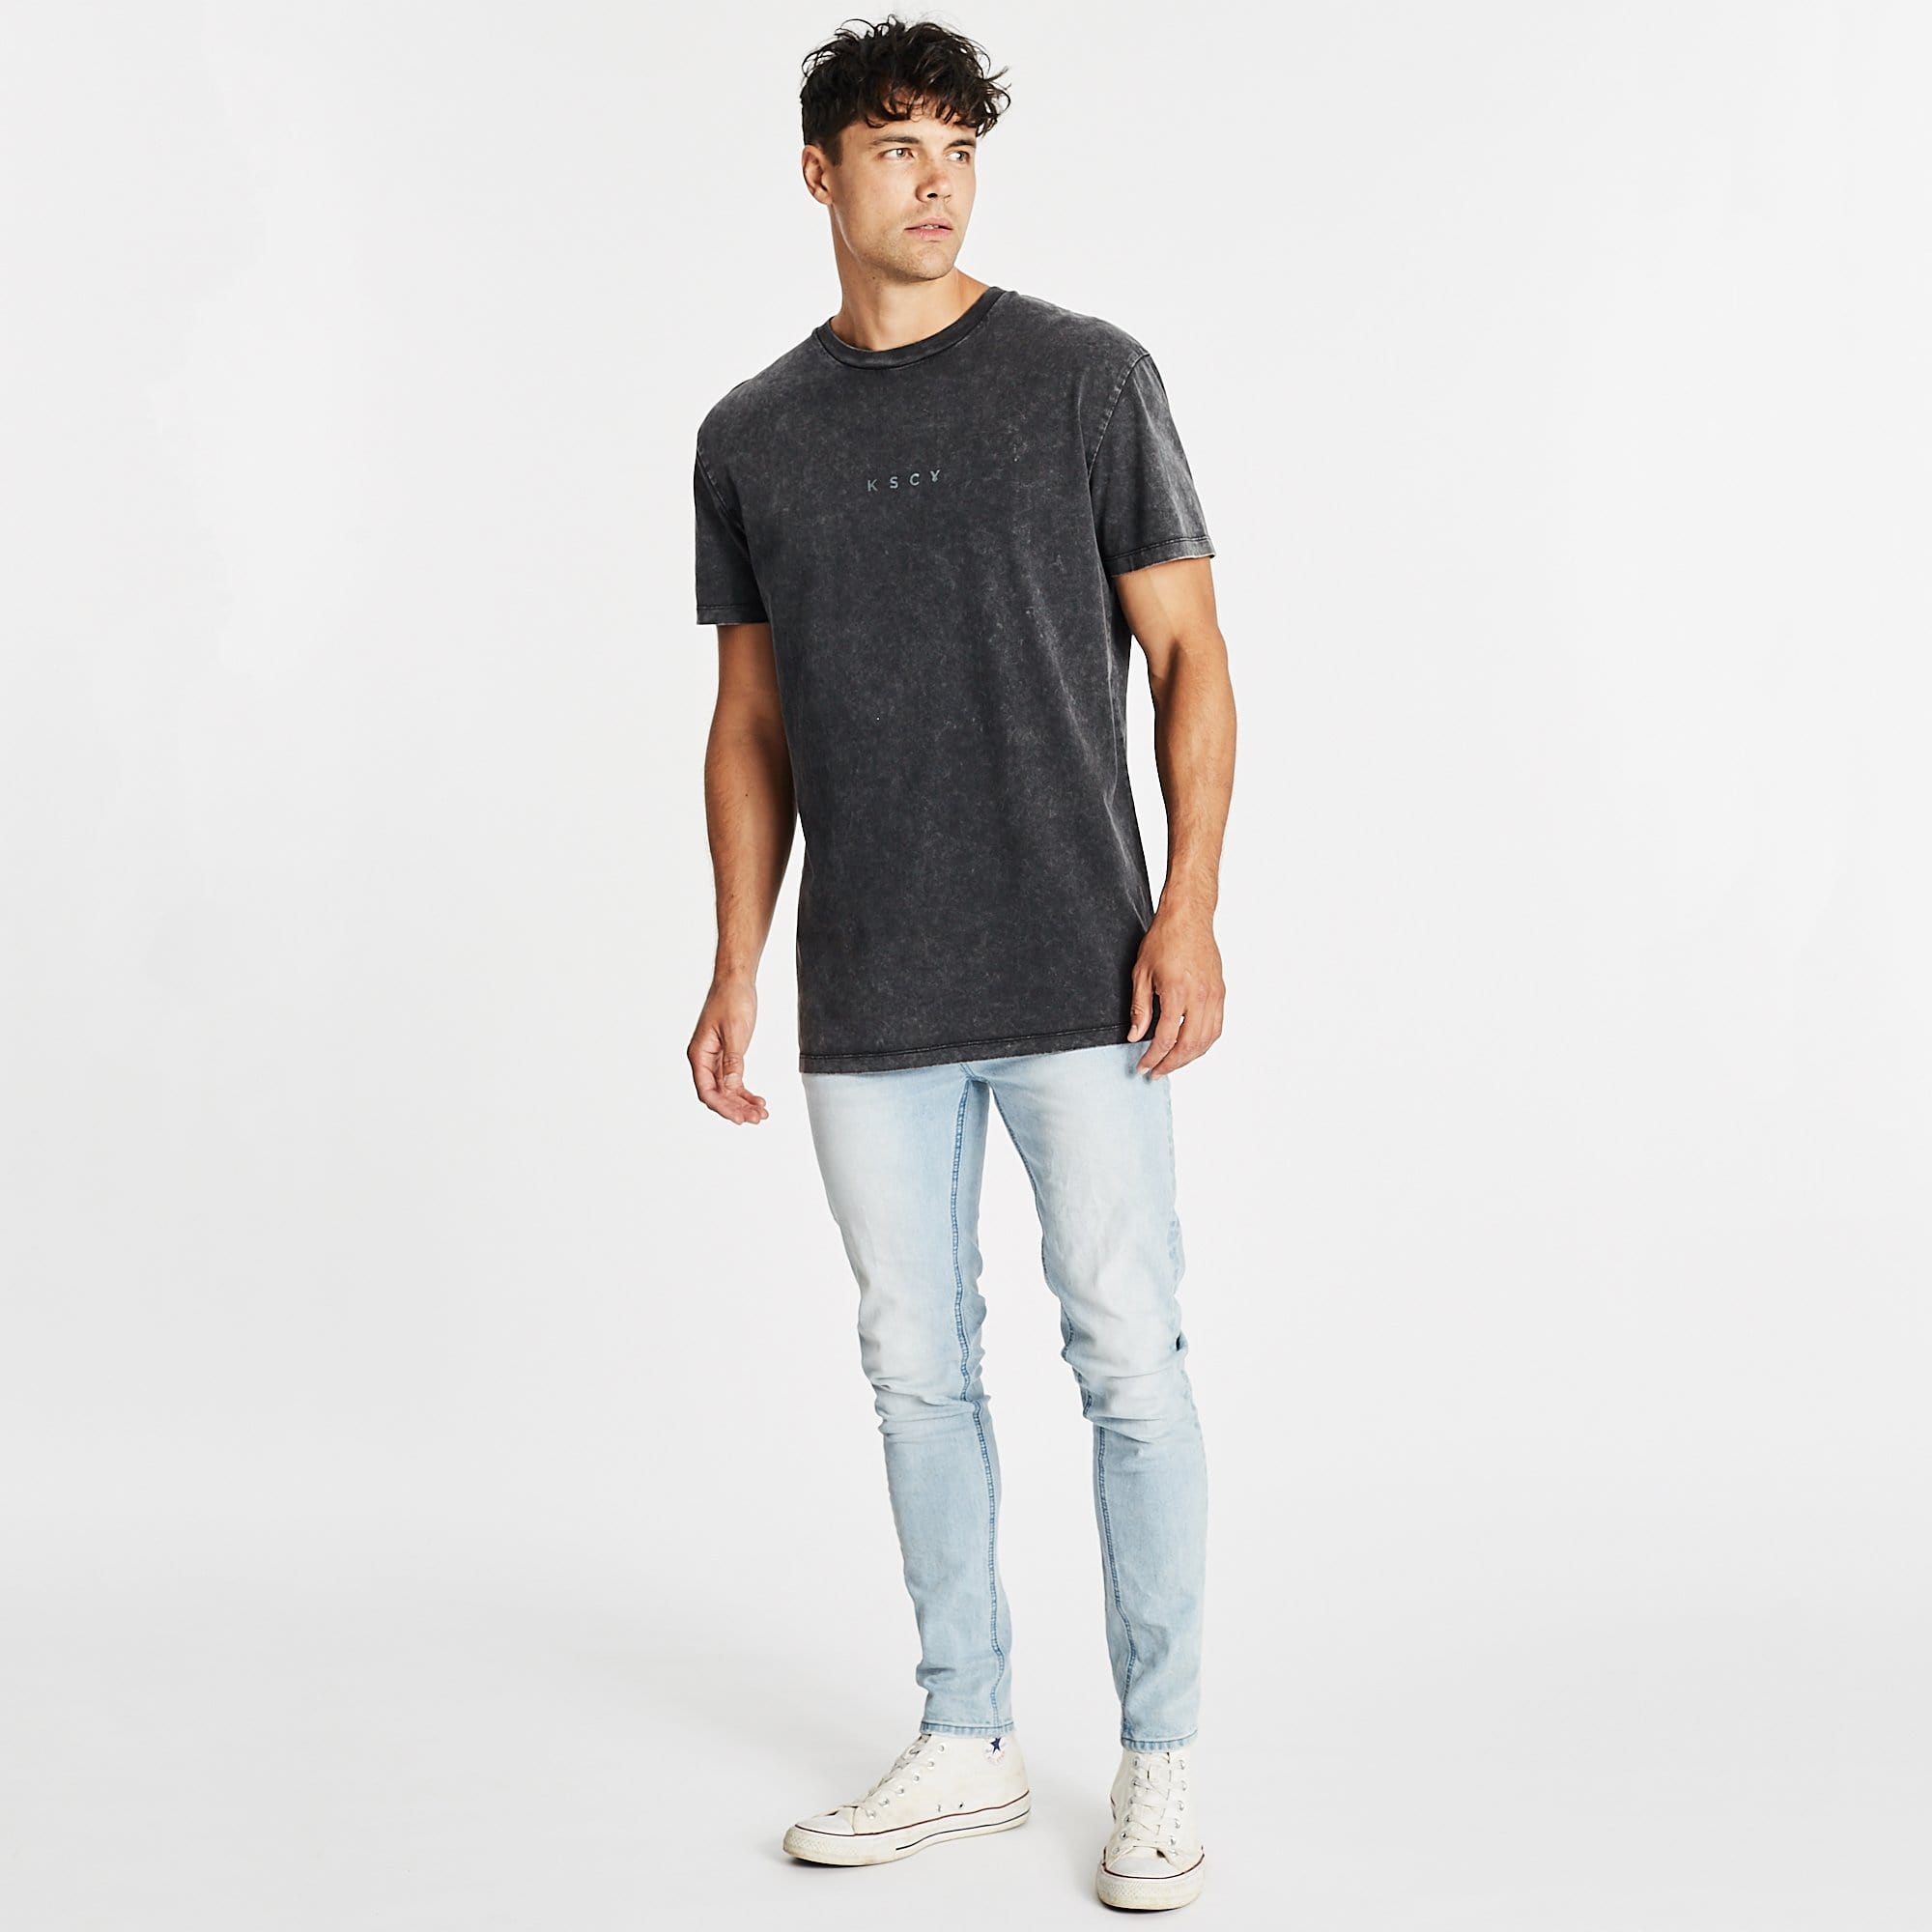 Hollywood Relaxed T-Shirt Mineral Black